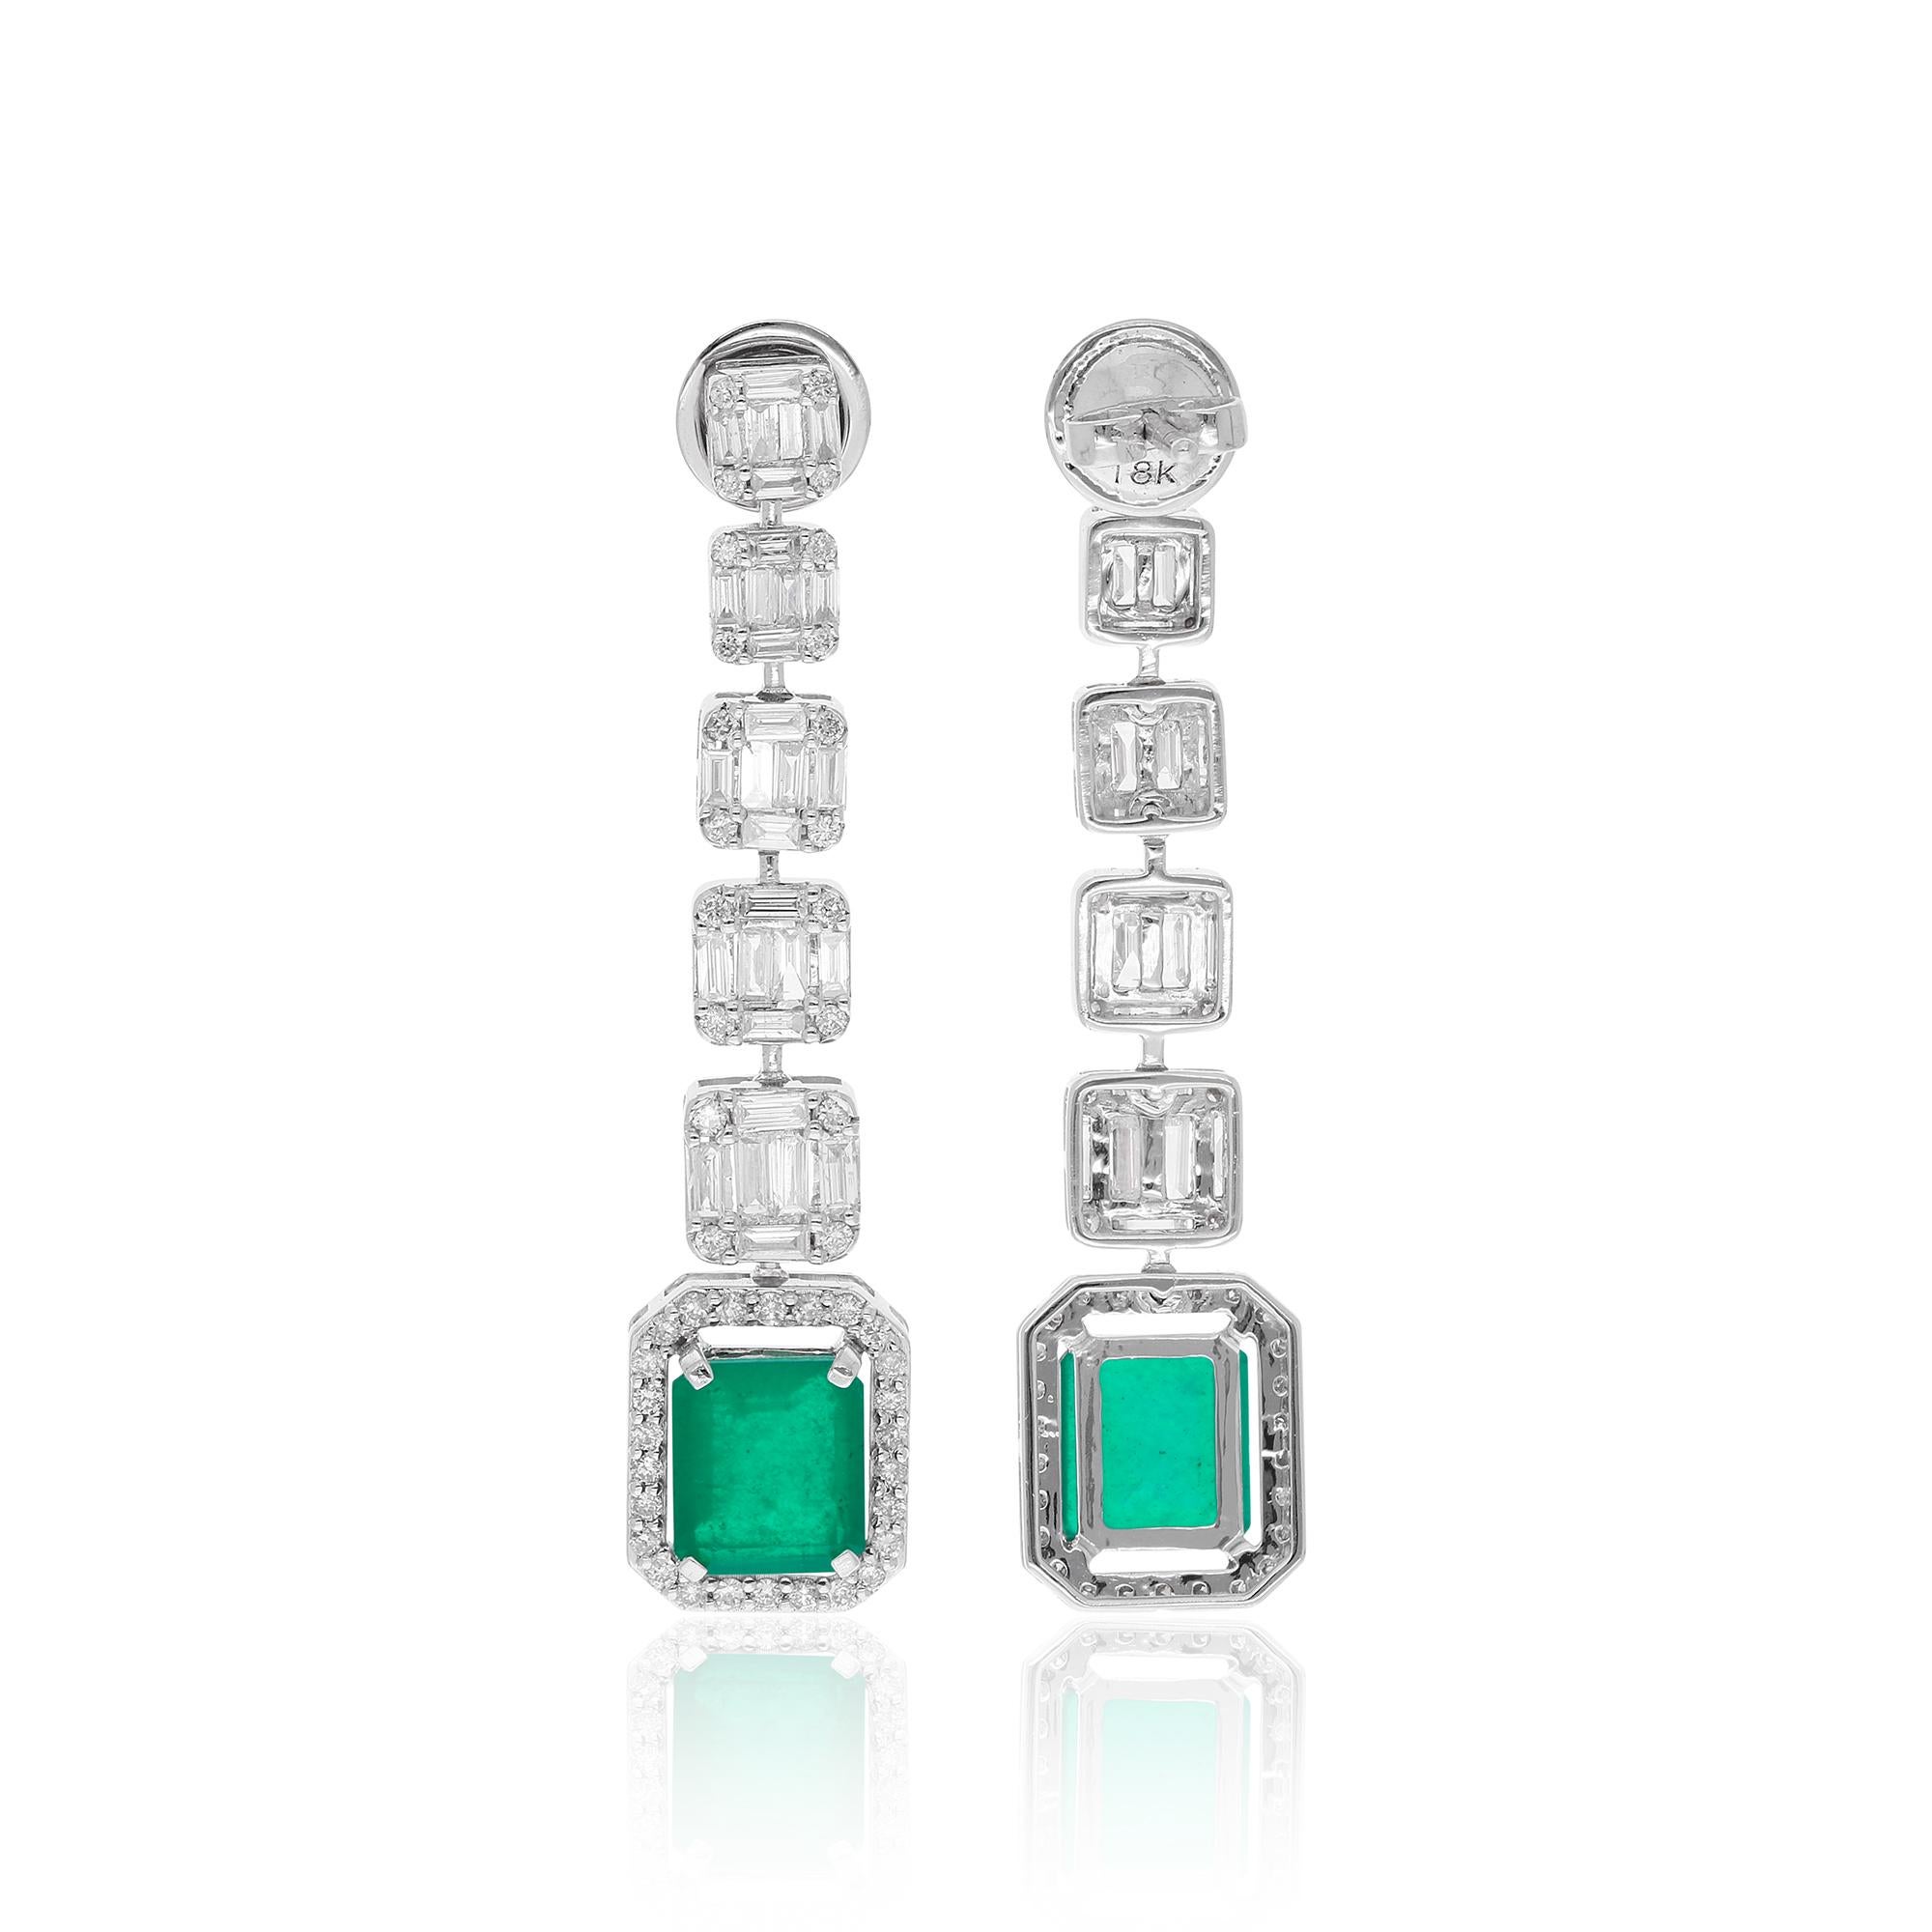 Item Code :- SEE-13292
Gross Wt. :- 9.97 gm
18k Solid White Gold Wt. :- 8.87 gm
Natural Diamond Wt. :- 1.90 Ct. ( AVERAGE DIAMOND CLARITY SI1-SI2 & COLOR H-I )
Green Gemstone Wt. :- 3.48 Ct.
Earrings Size :- 45 mm approx.

✦